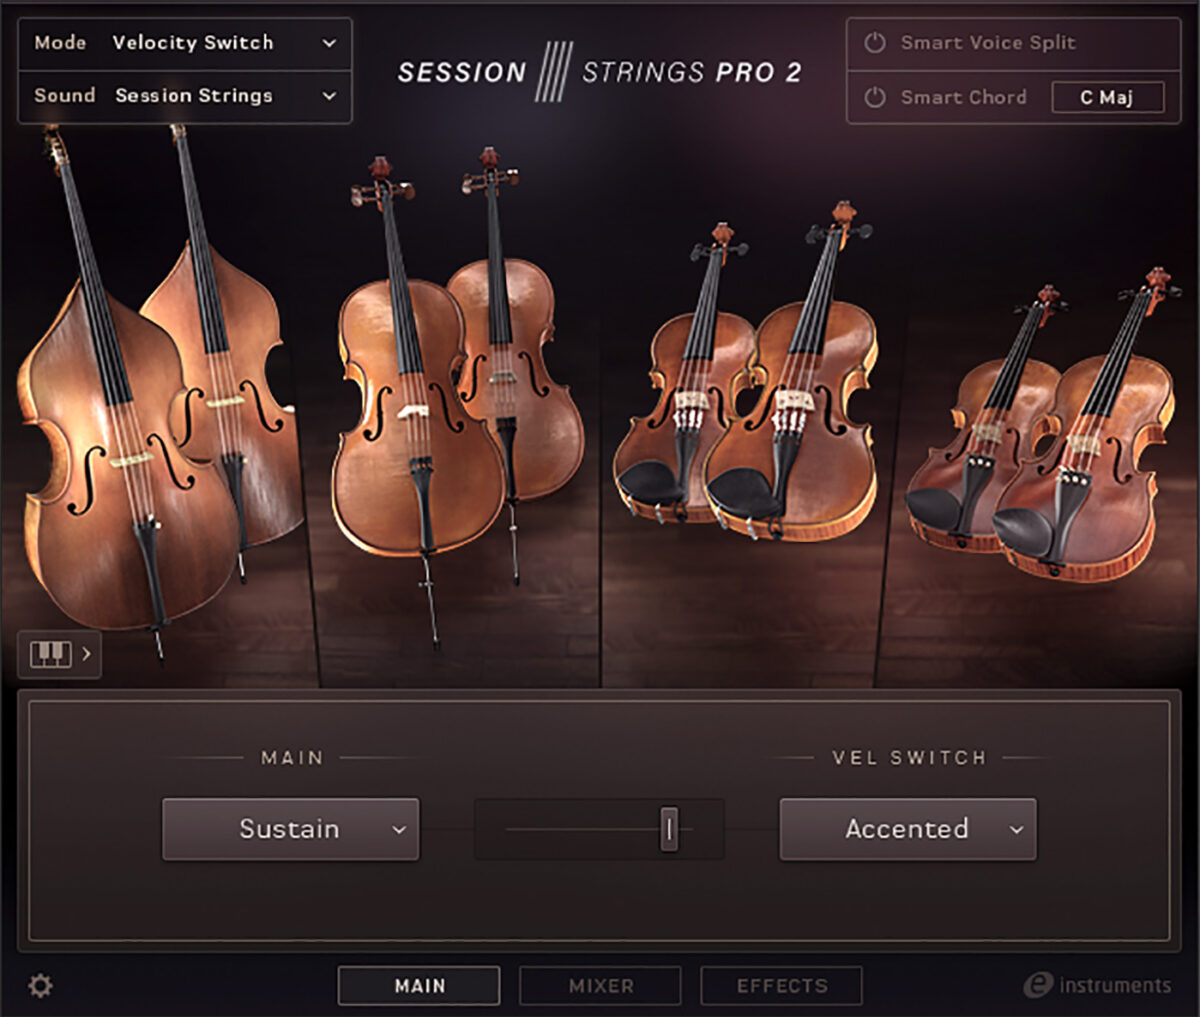 Session Strings Pro 2